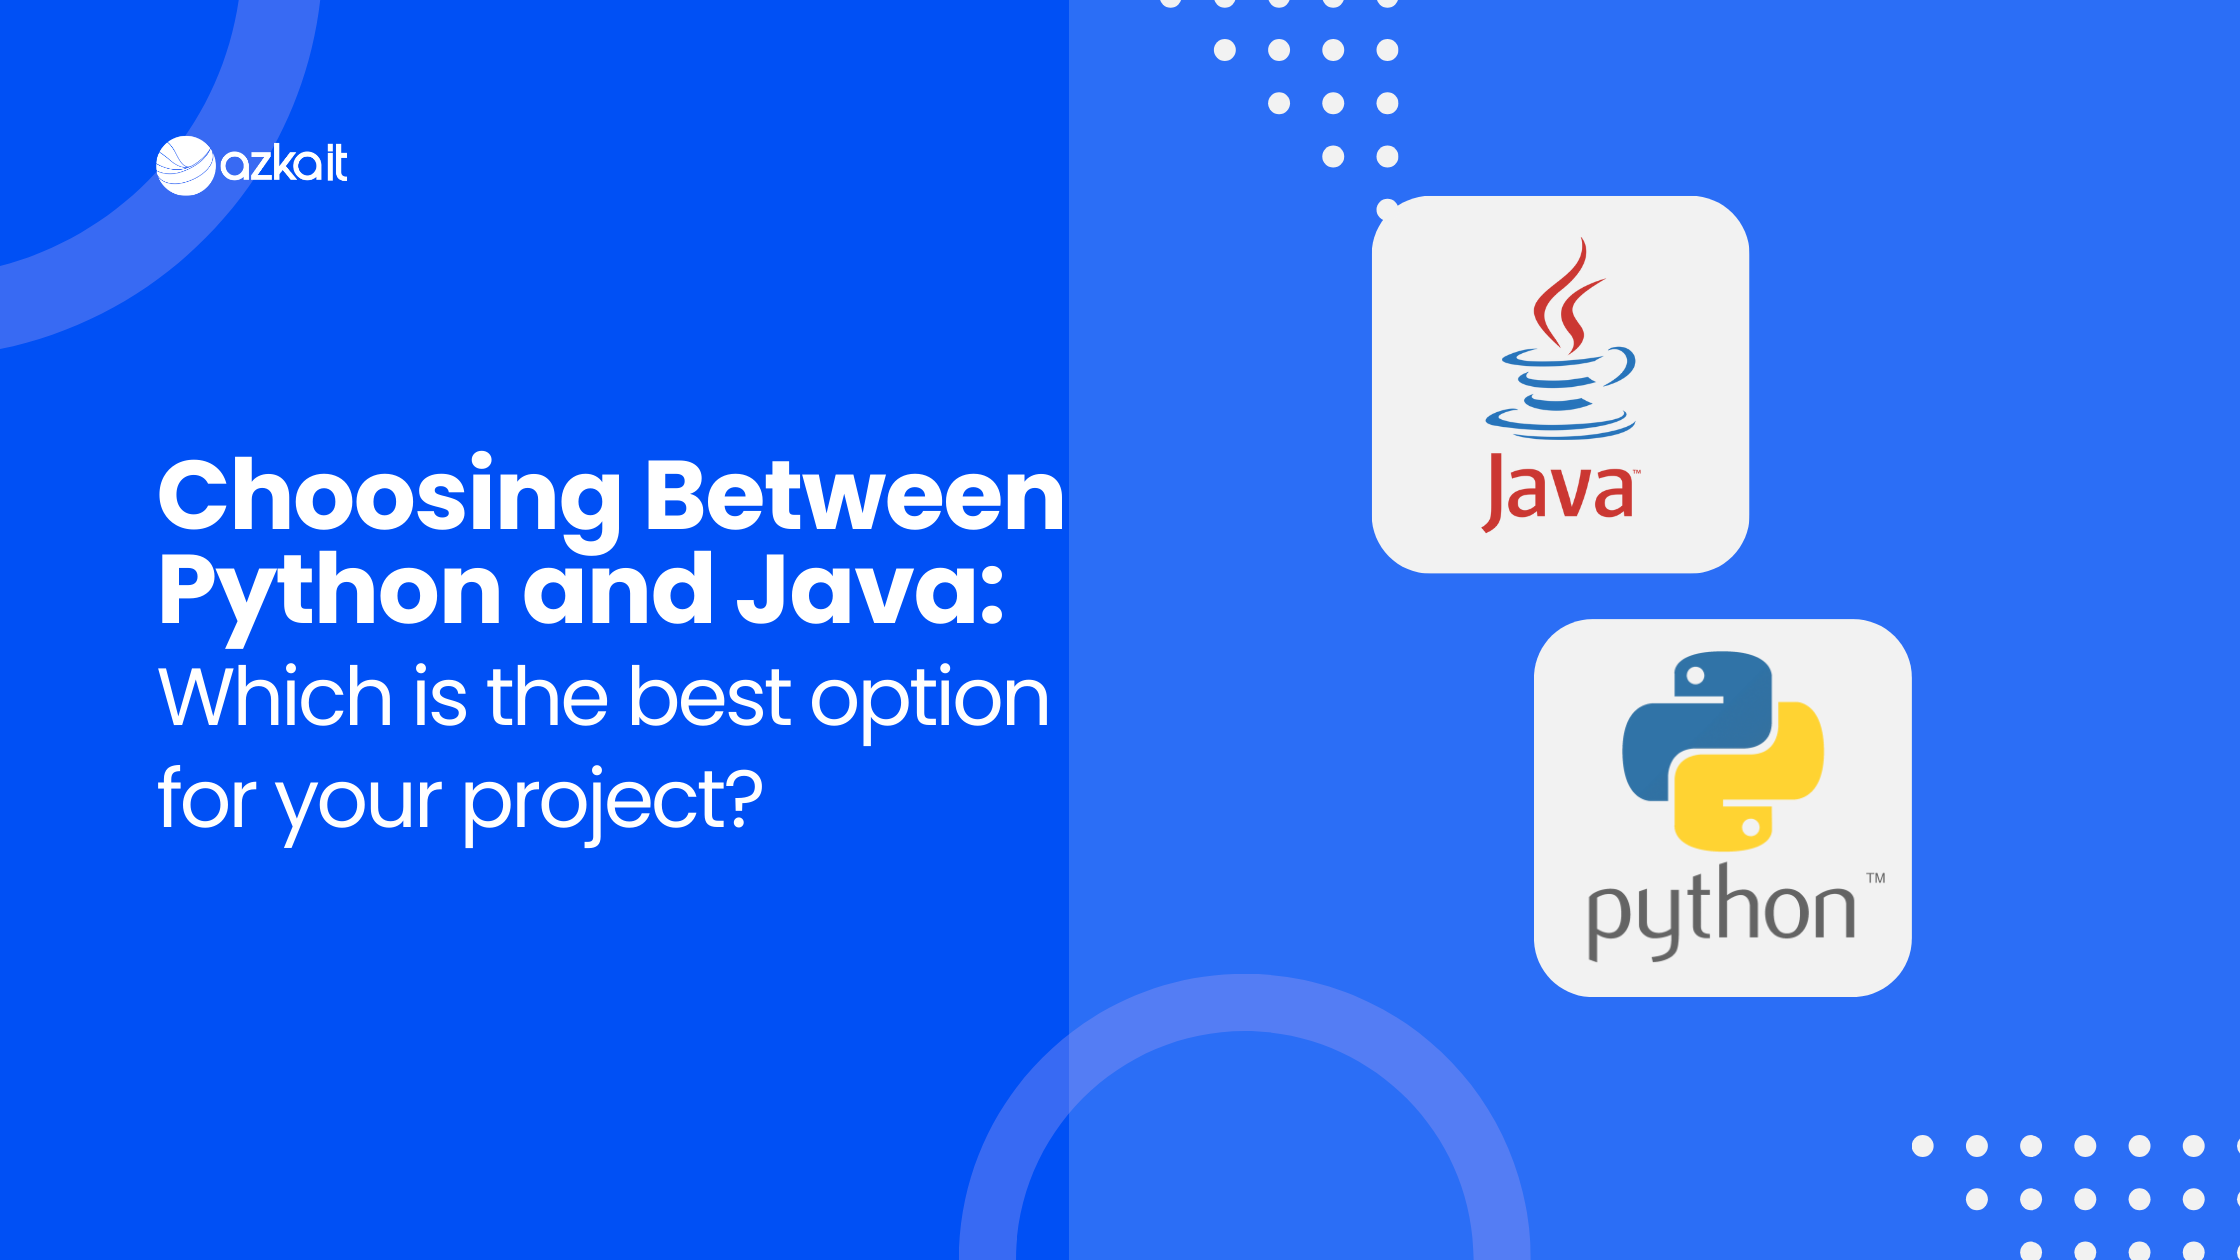 Choosing Between Python and Java: Which is the best option for your project?